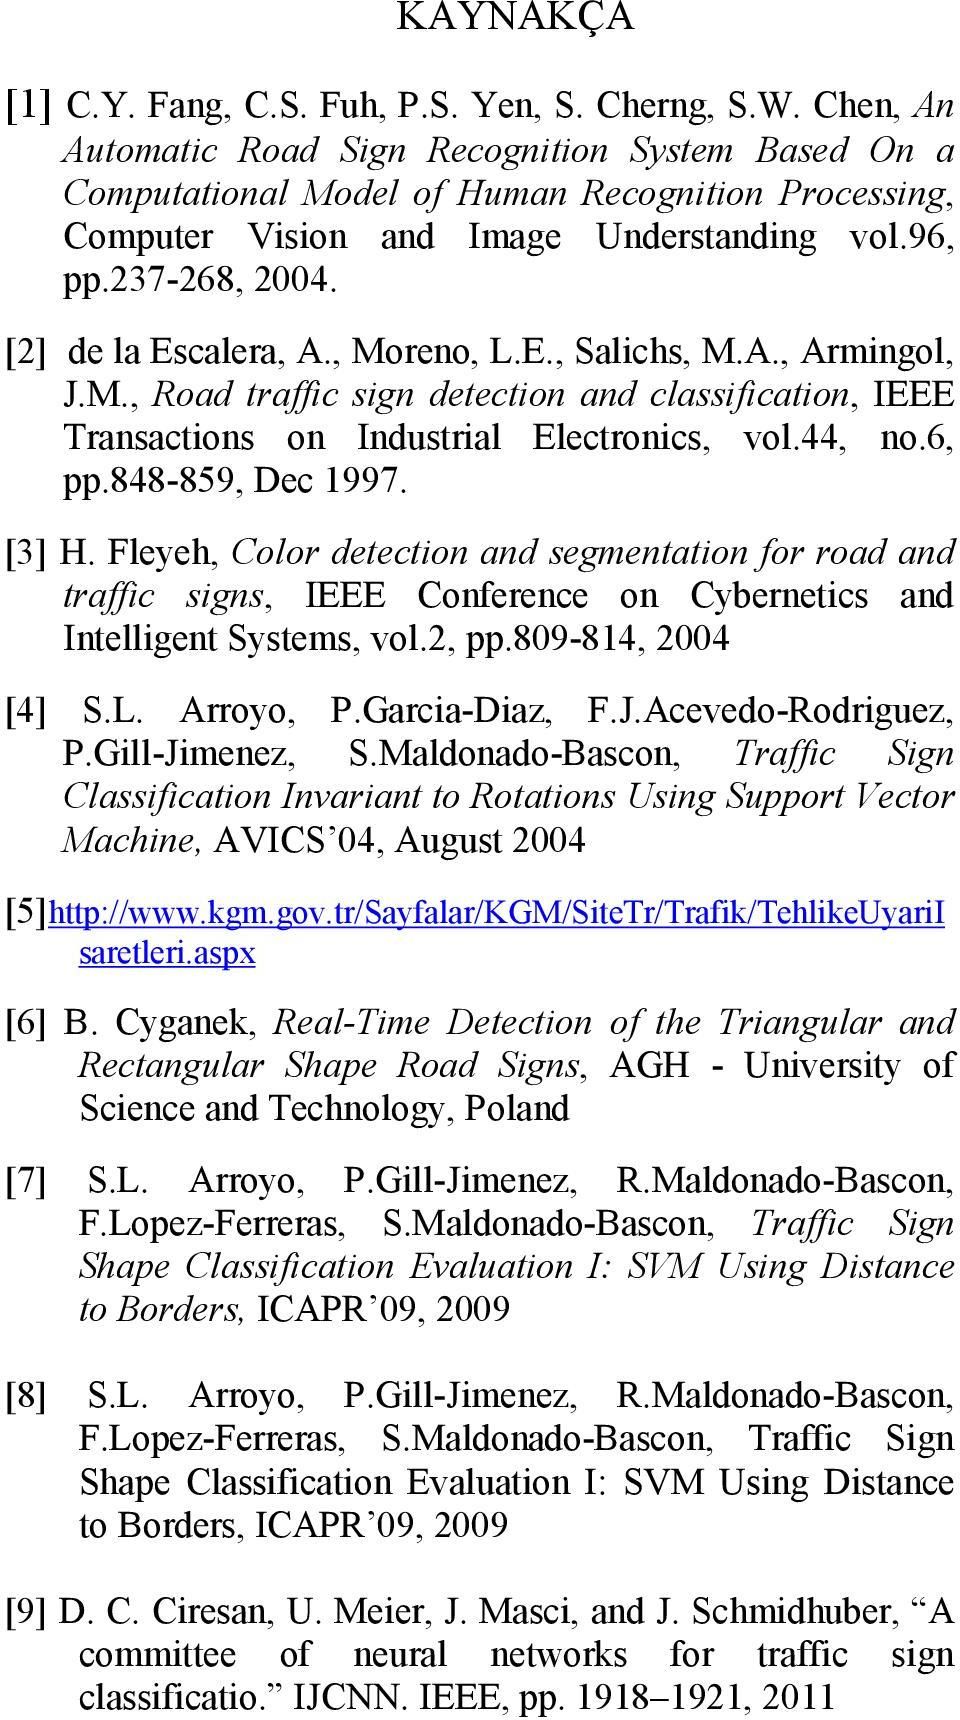 , Moreno, L.E., Salchs, M.A., Armngol, J.M., Road traffc sgn detecton and classfcaton, IEEE Transactons on Industral Electroncs, vol.44, no.6, pp.848-859, Dec 1997. [3] H.